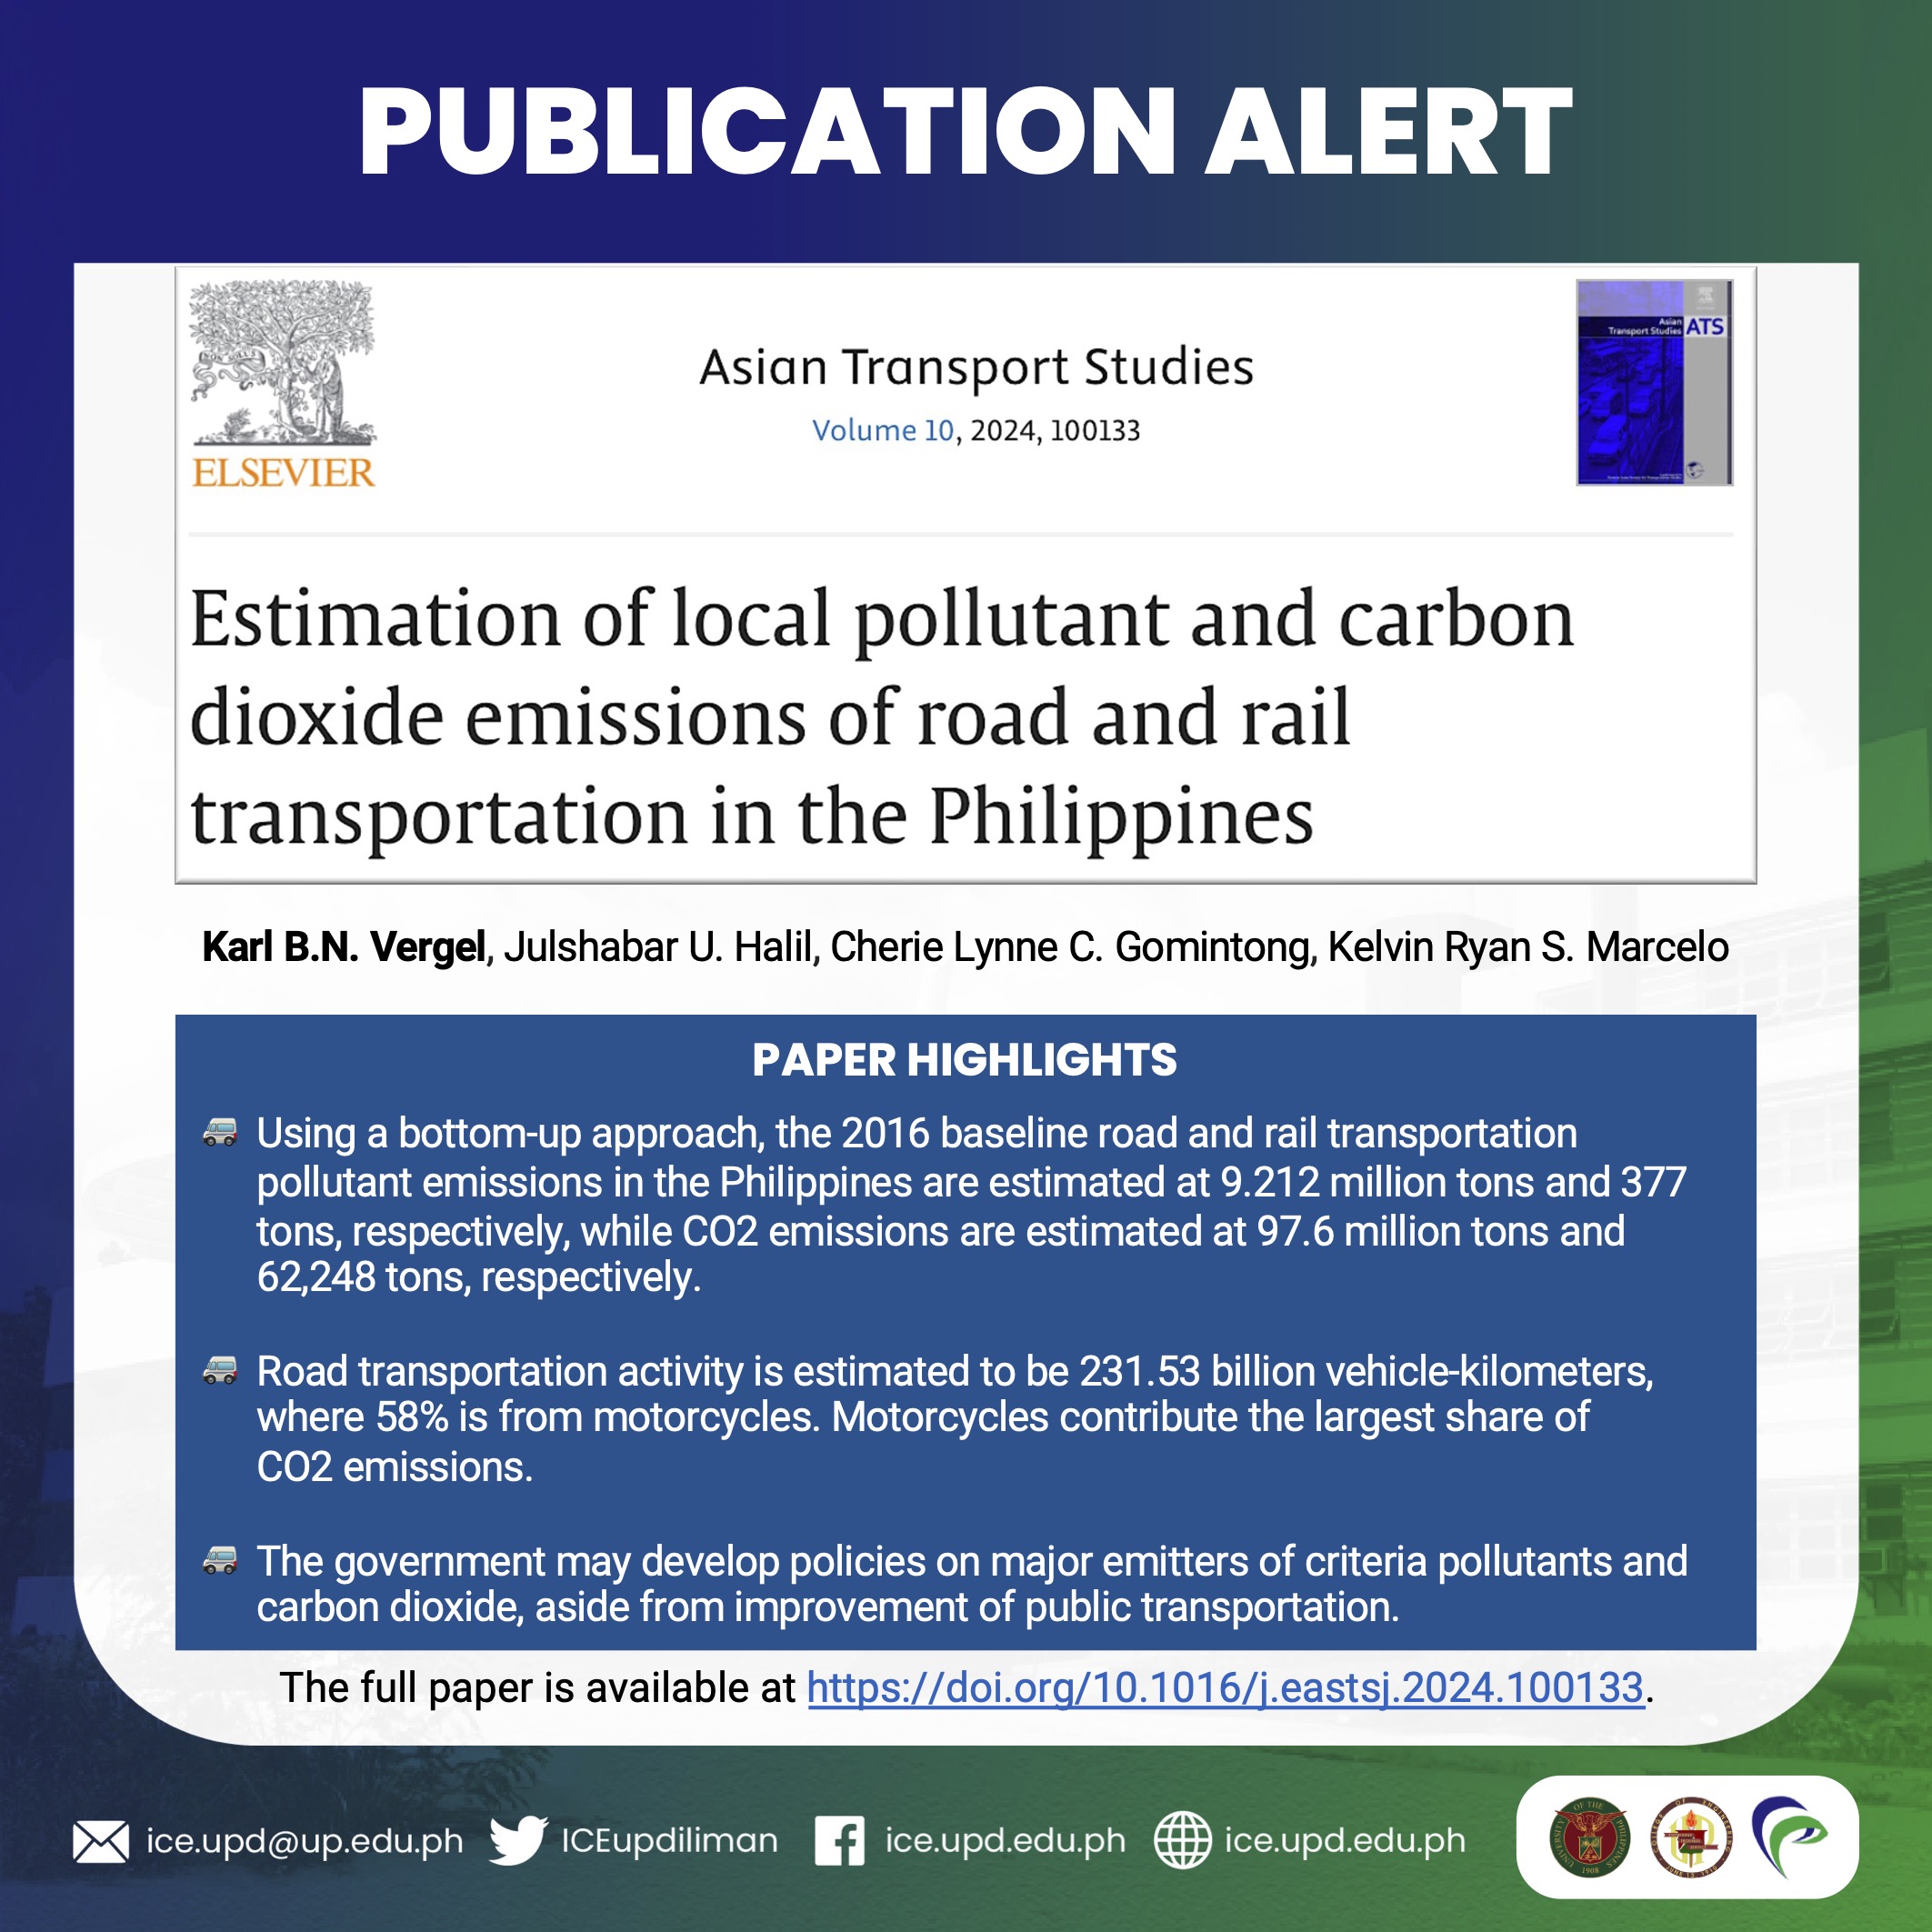 Publication Alert: Dr. Vergel publishes an article on estimation of pollutant emissions of road and rail transportation in the Philippines